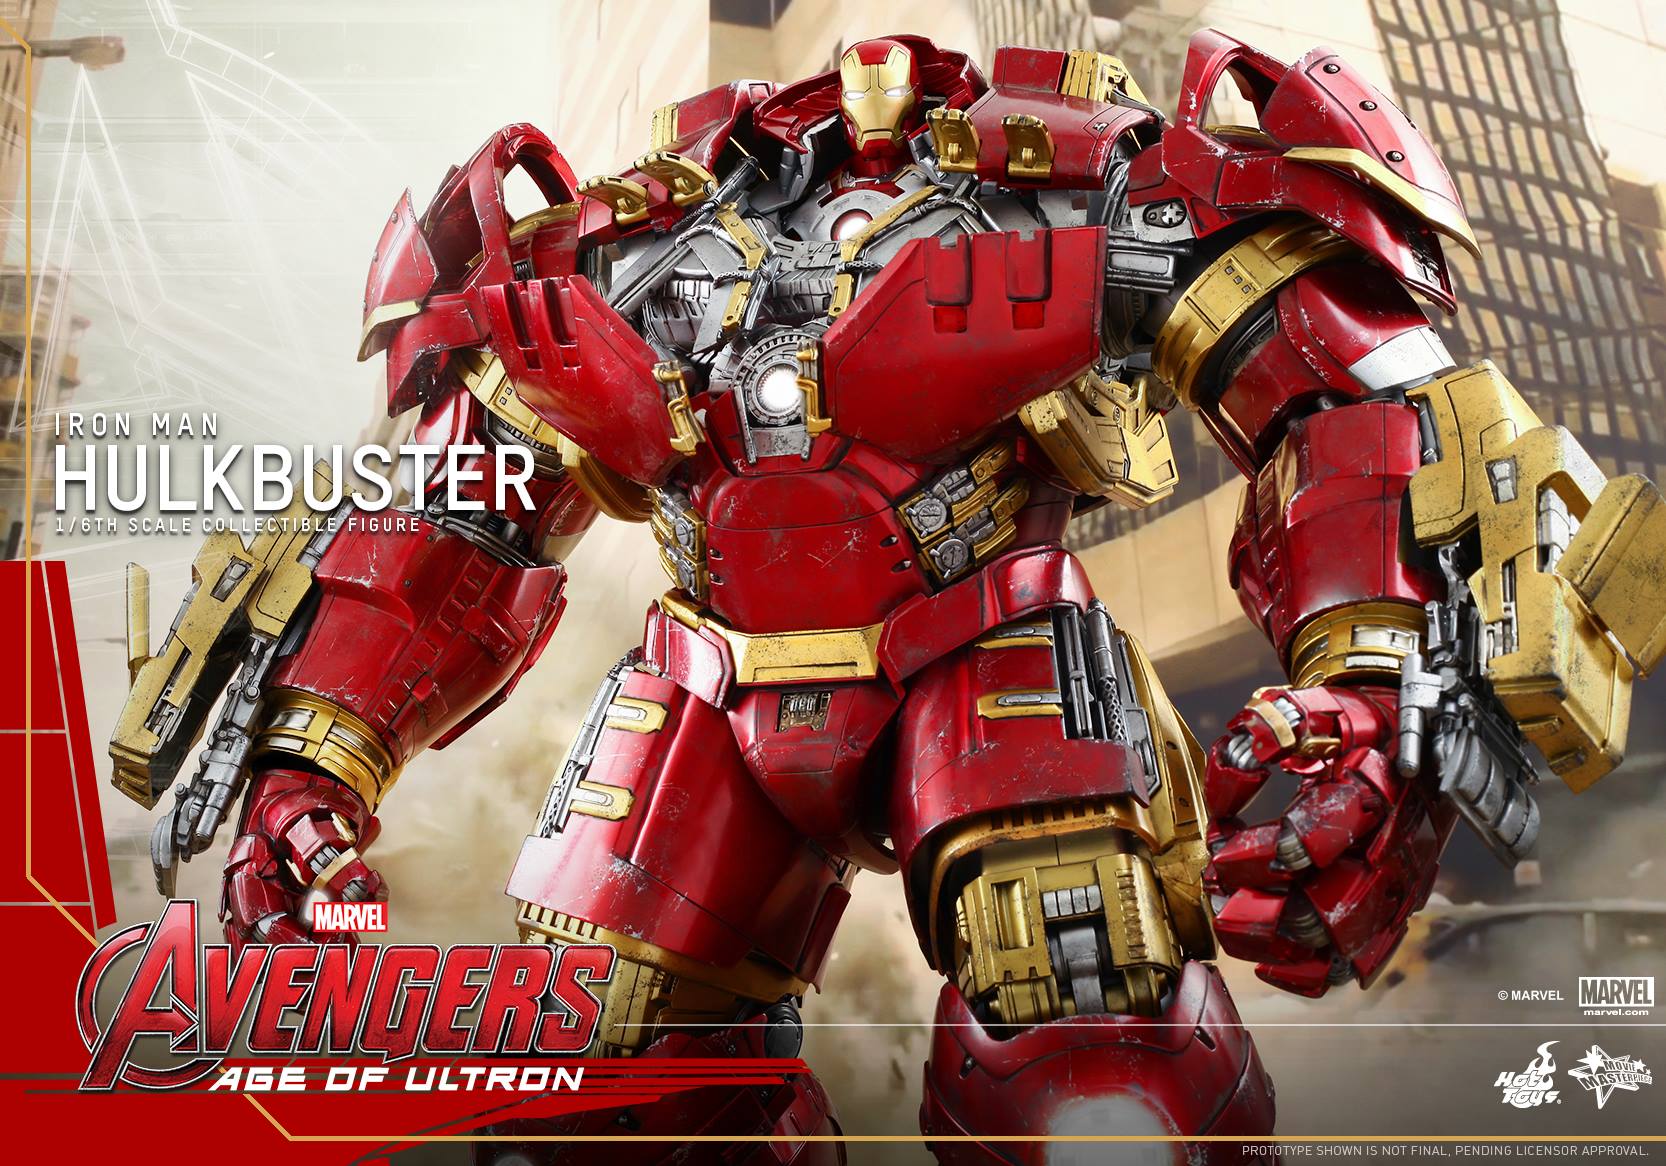 See 'Iron Man' Inside AVENGERS: AGE OF ULTRON's 'Hulkbuster' In New Hot Toys Image